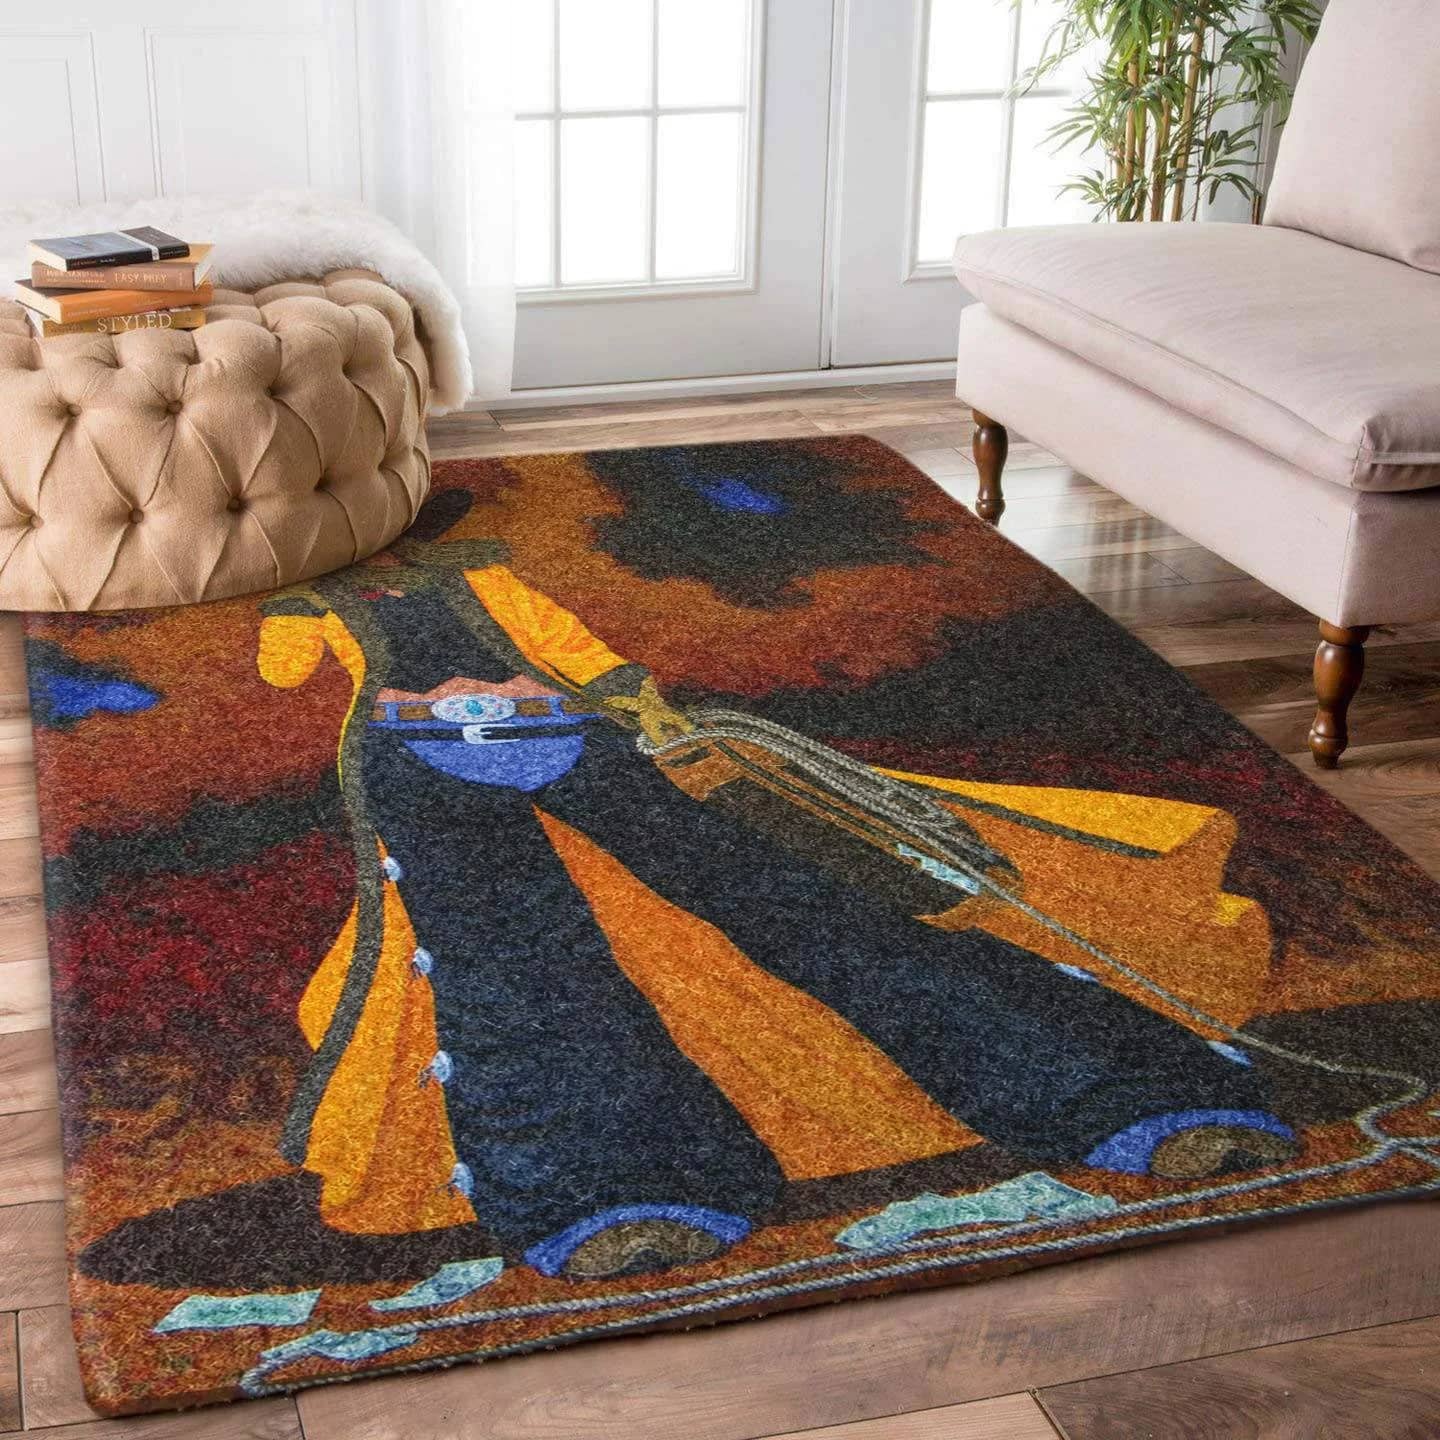 Cowgirl Limited Edition Amazon Best Seller Sku 262456 Rug